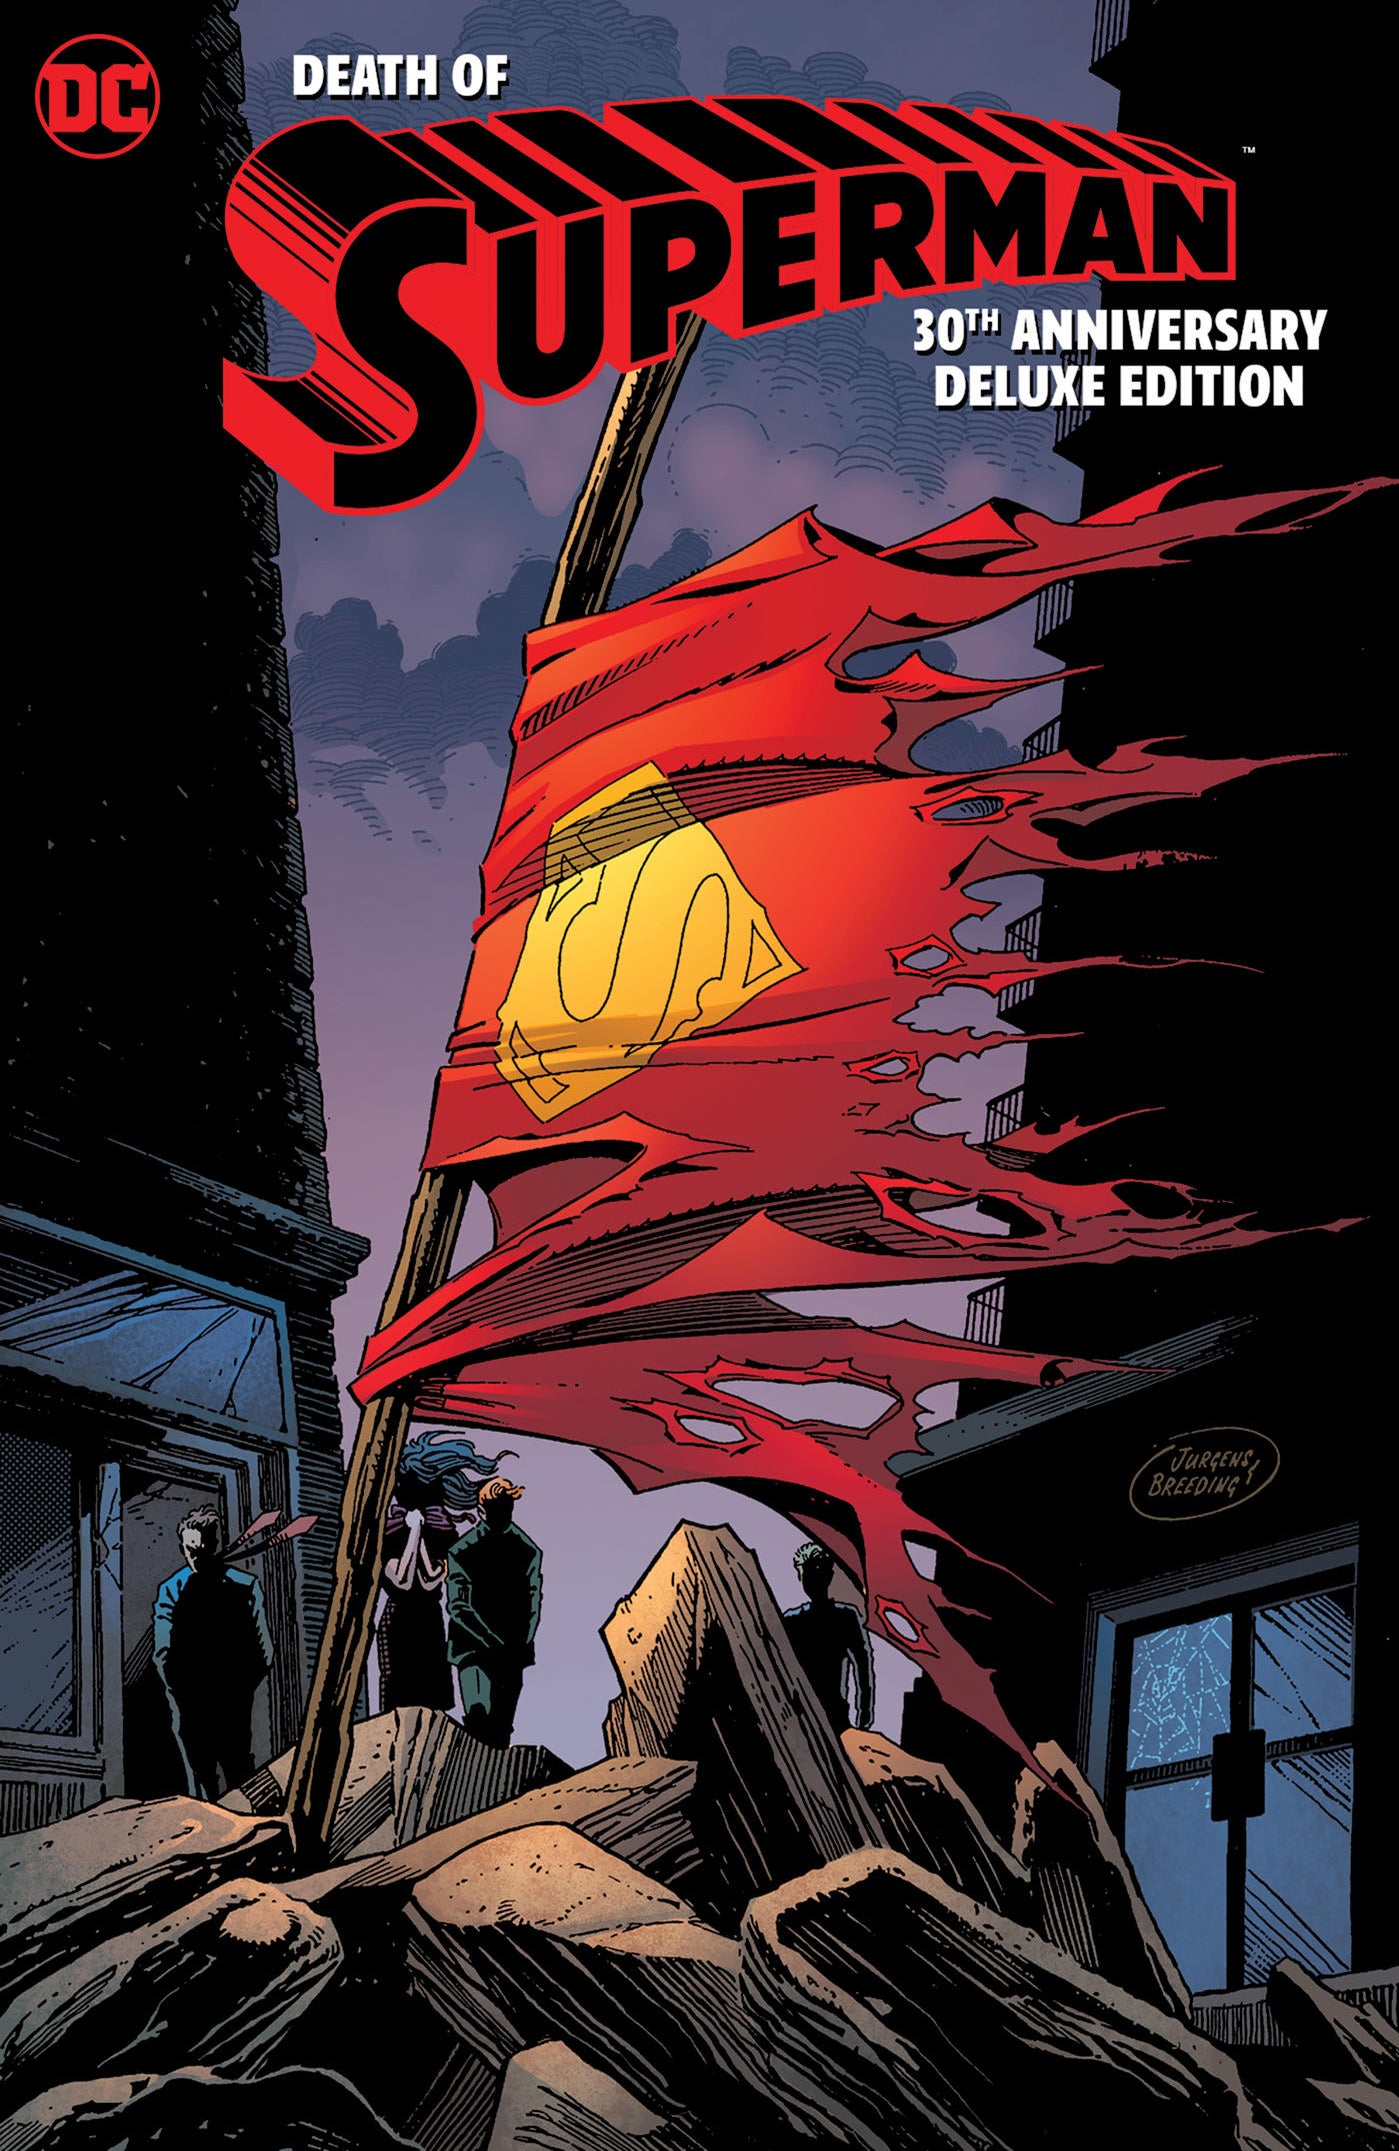 death-of-superman-30th-anniversary-deluxe-edition.jpg